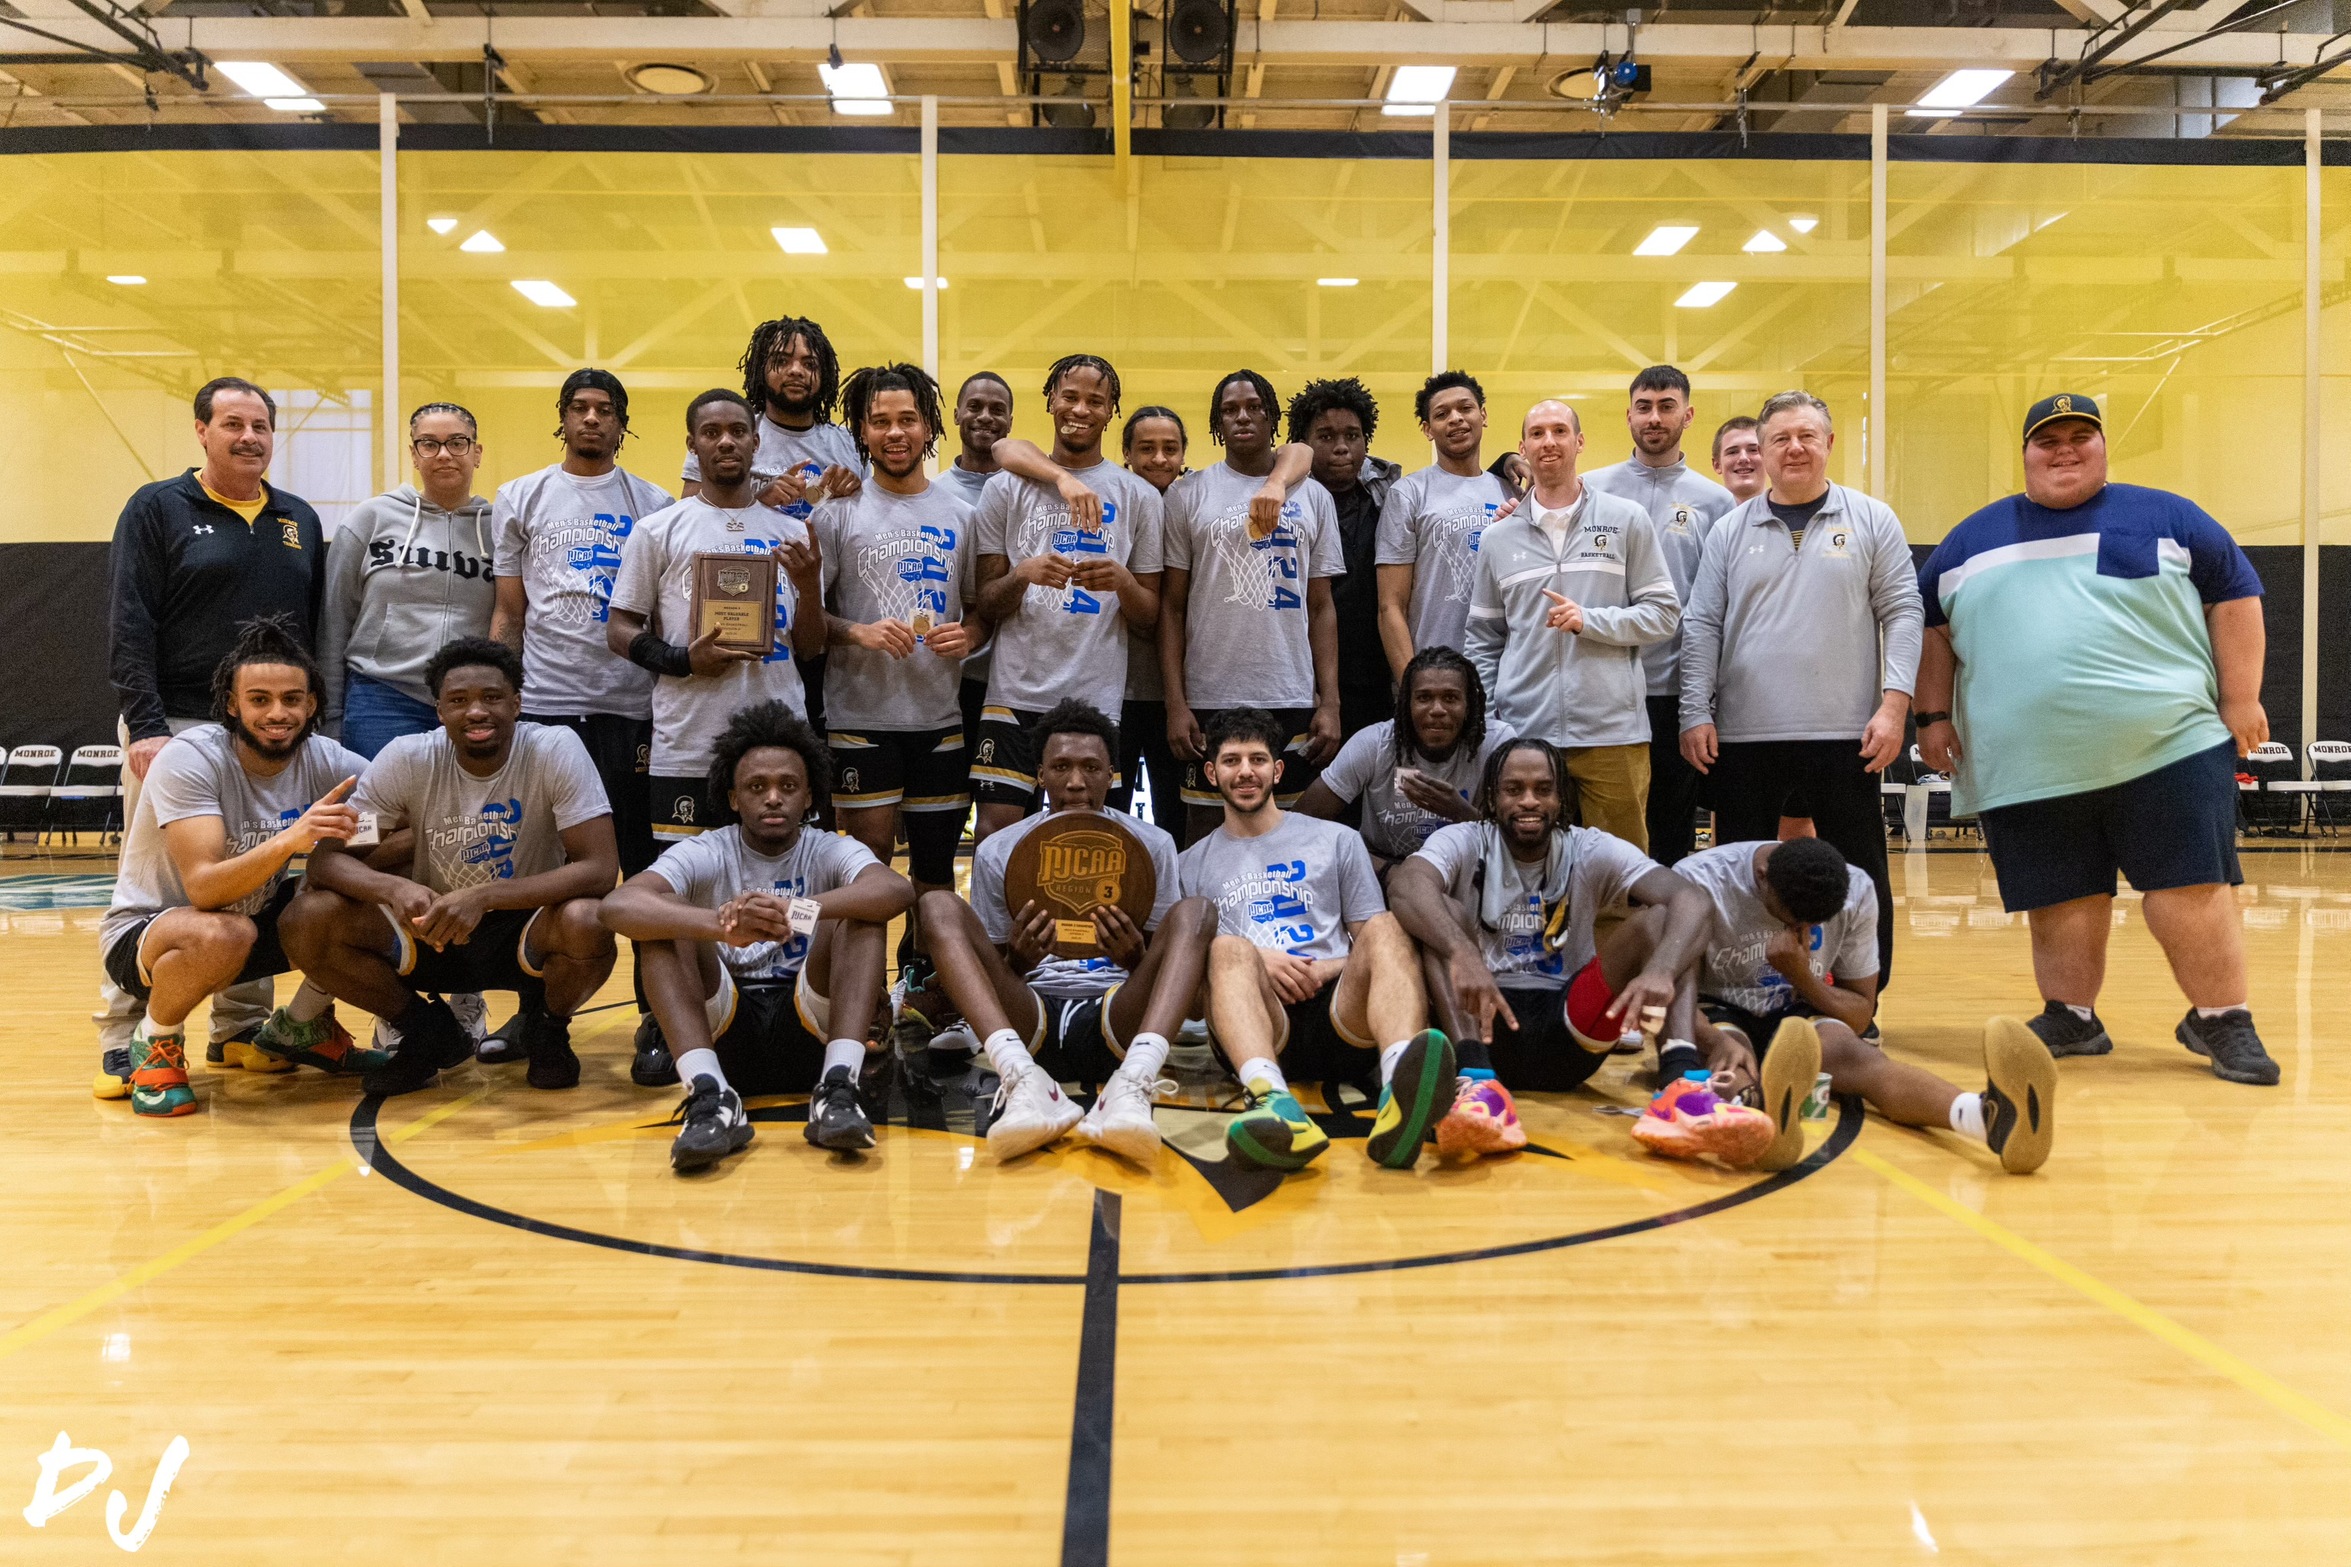 Tribunes Topple Erie 80-60, Program Sets Region III History with 13th Title